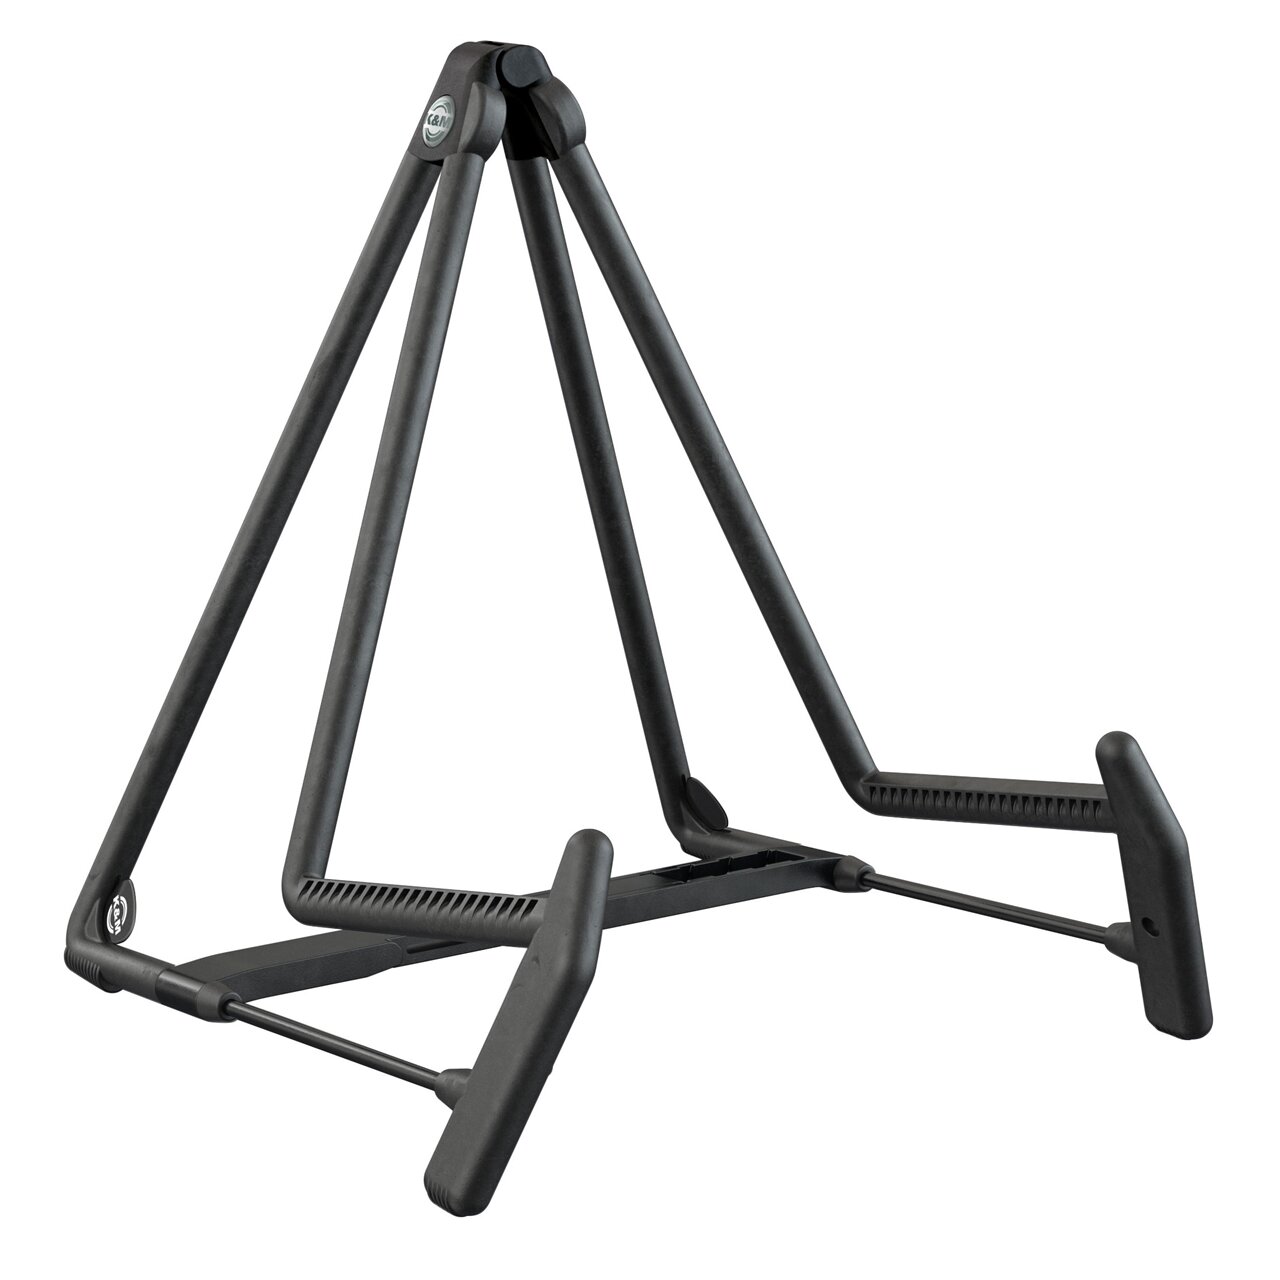 K & M Helli 2 Acoustic Guitar Stand - Black : photo 1